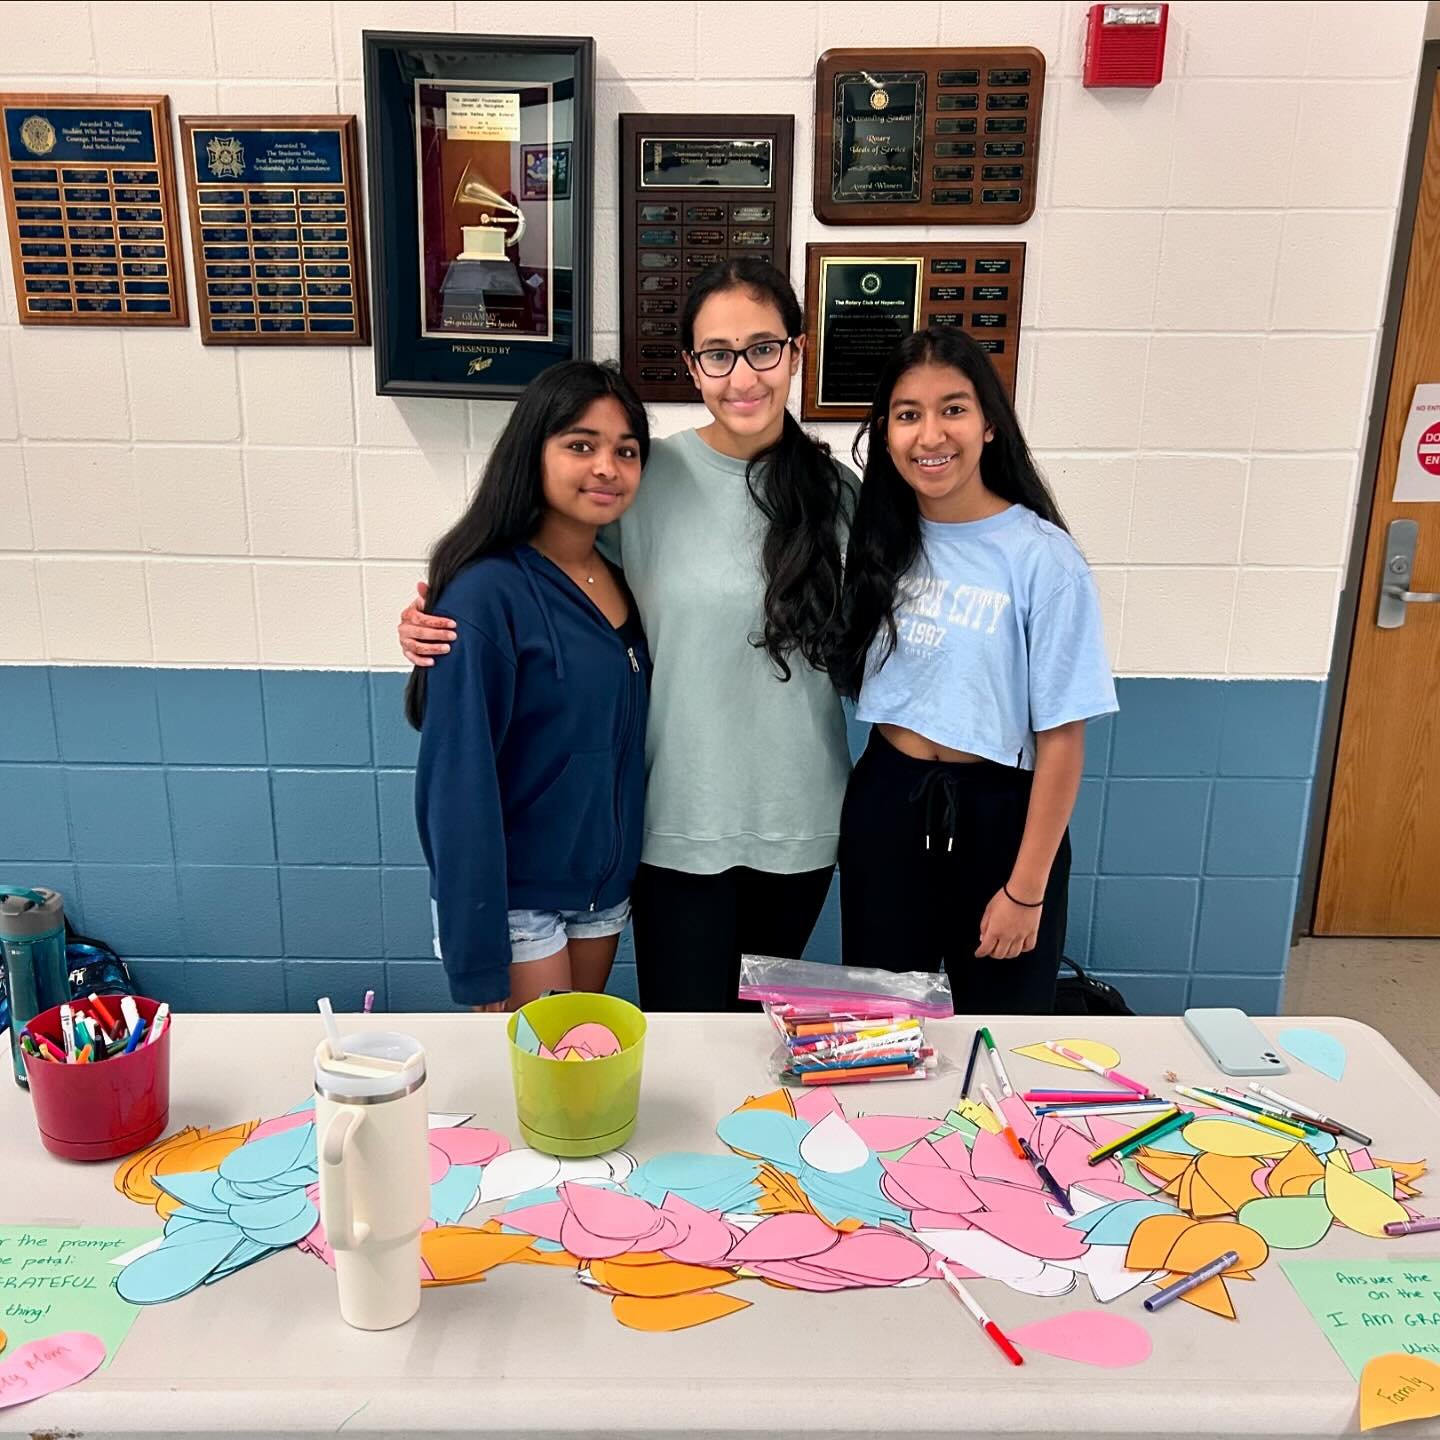 Seeing some great advocacy work spreading positive messages around school lately! The Shanti Club has been leading gratitude activities for Mental Health Awareness Month, plus the No Place for Hate art is prominently displayed in the main hall for al